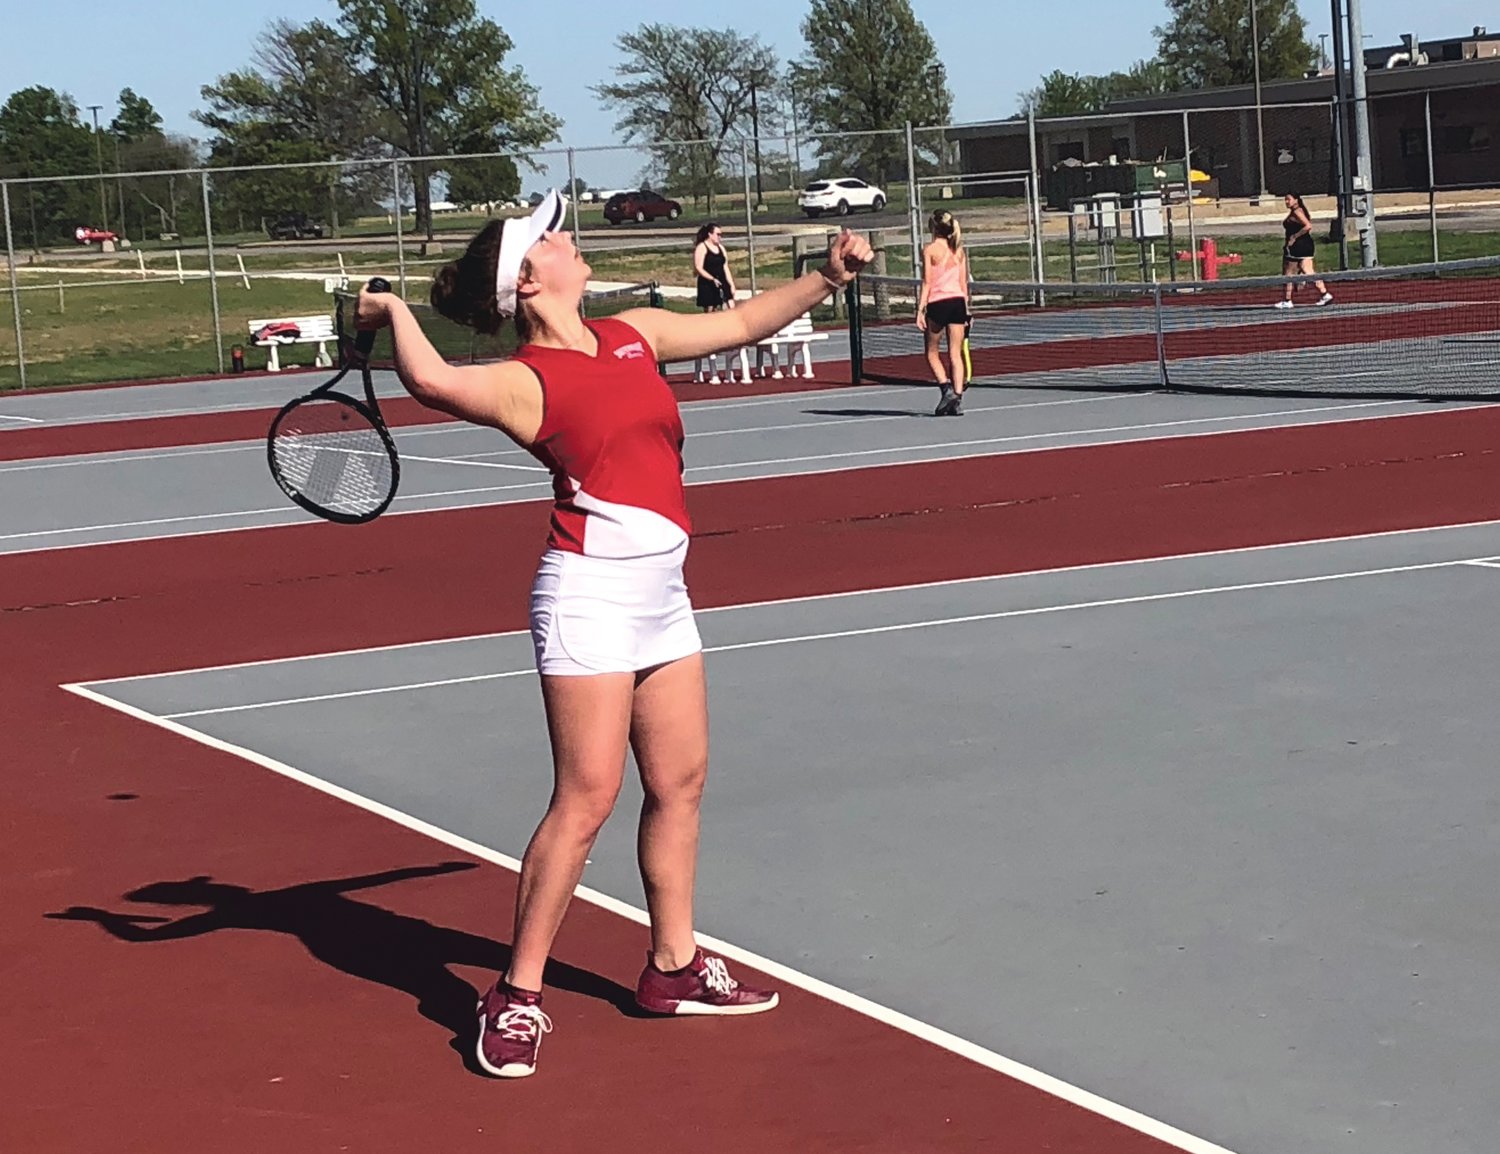 Southmont senior Sophie Reimondo and the Mounties’ girls’ tennis team are hoping they can compete for their first sectional title since 1996.